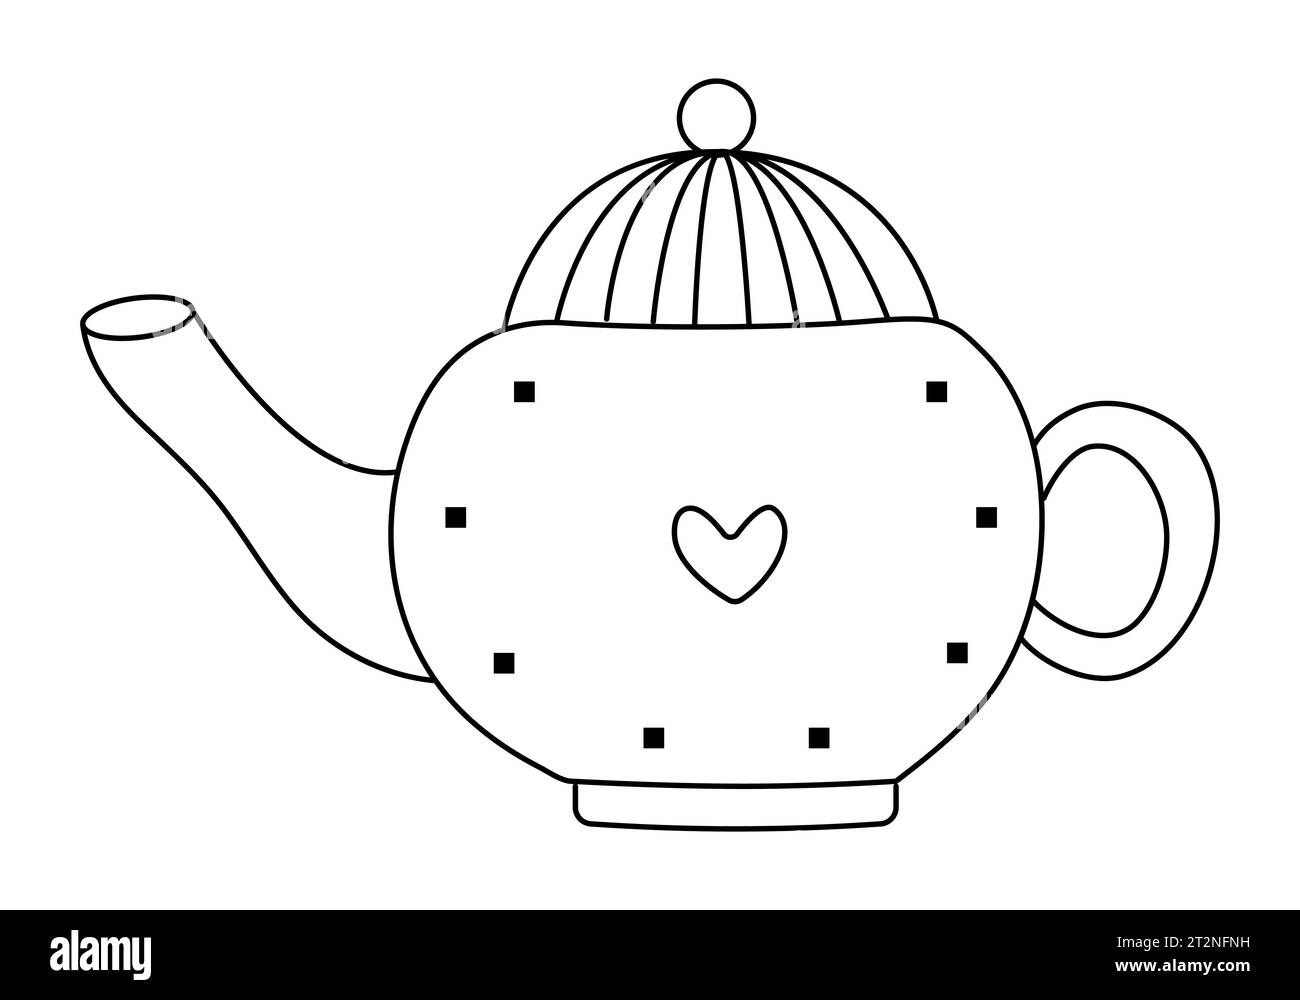 Black line round kettle with a heart and squares, cute monochrome teapot, vector illustration of teakettle Stock Vector